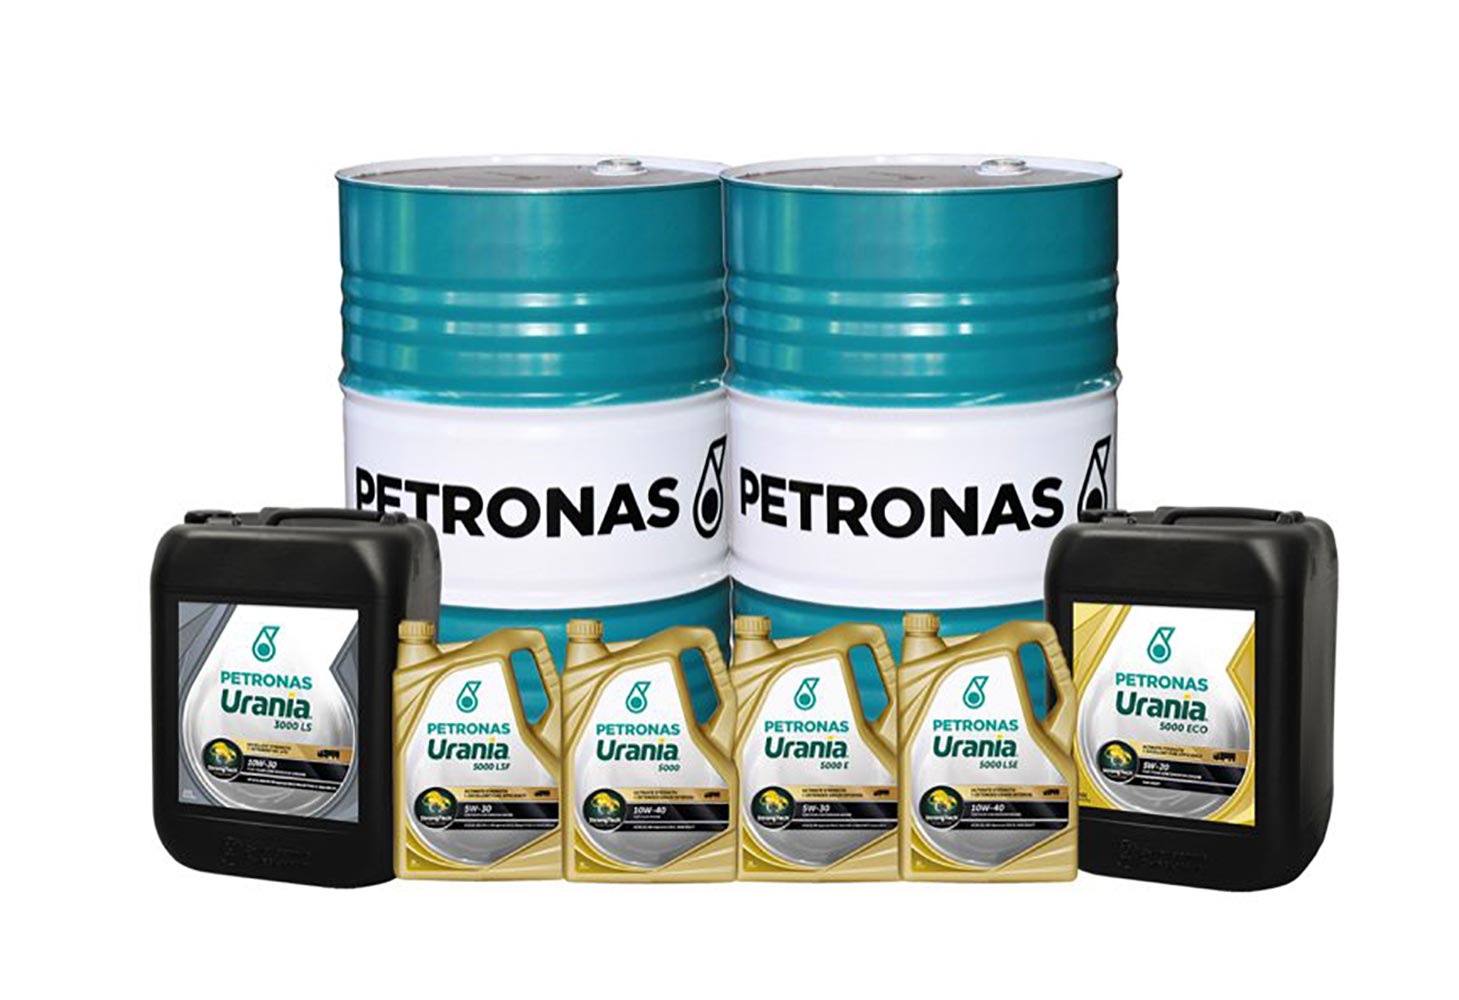 PETRONAS Lubricants partners with Al Babtain Group in Kuwait